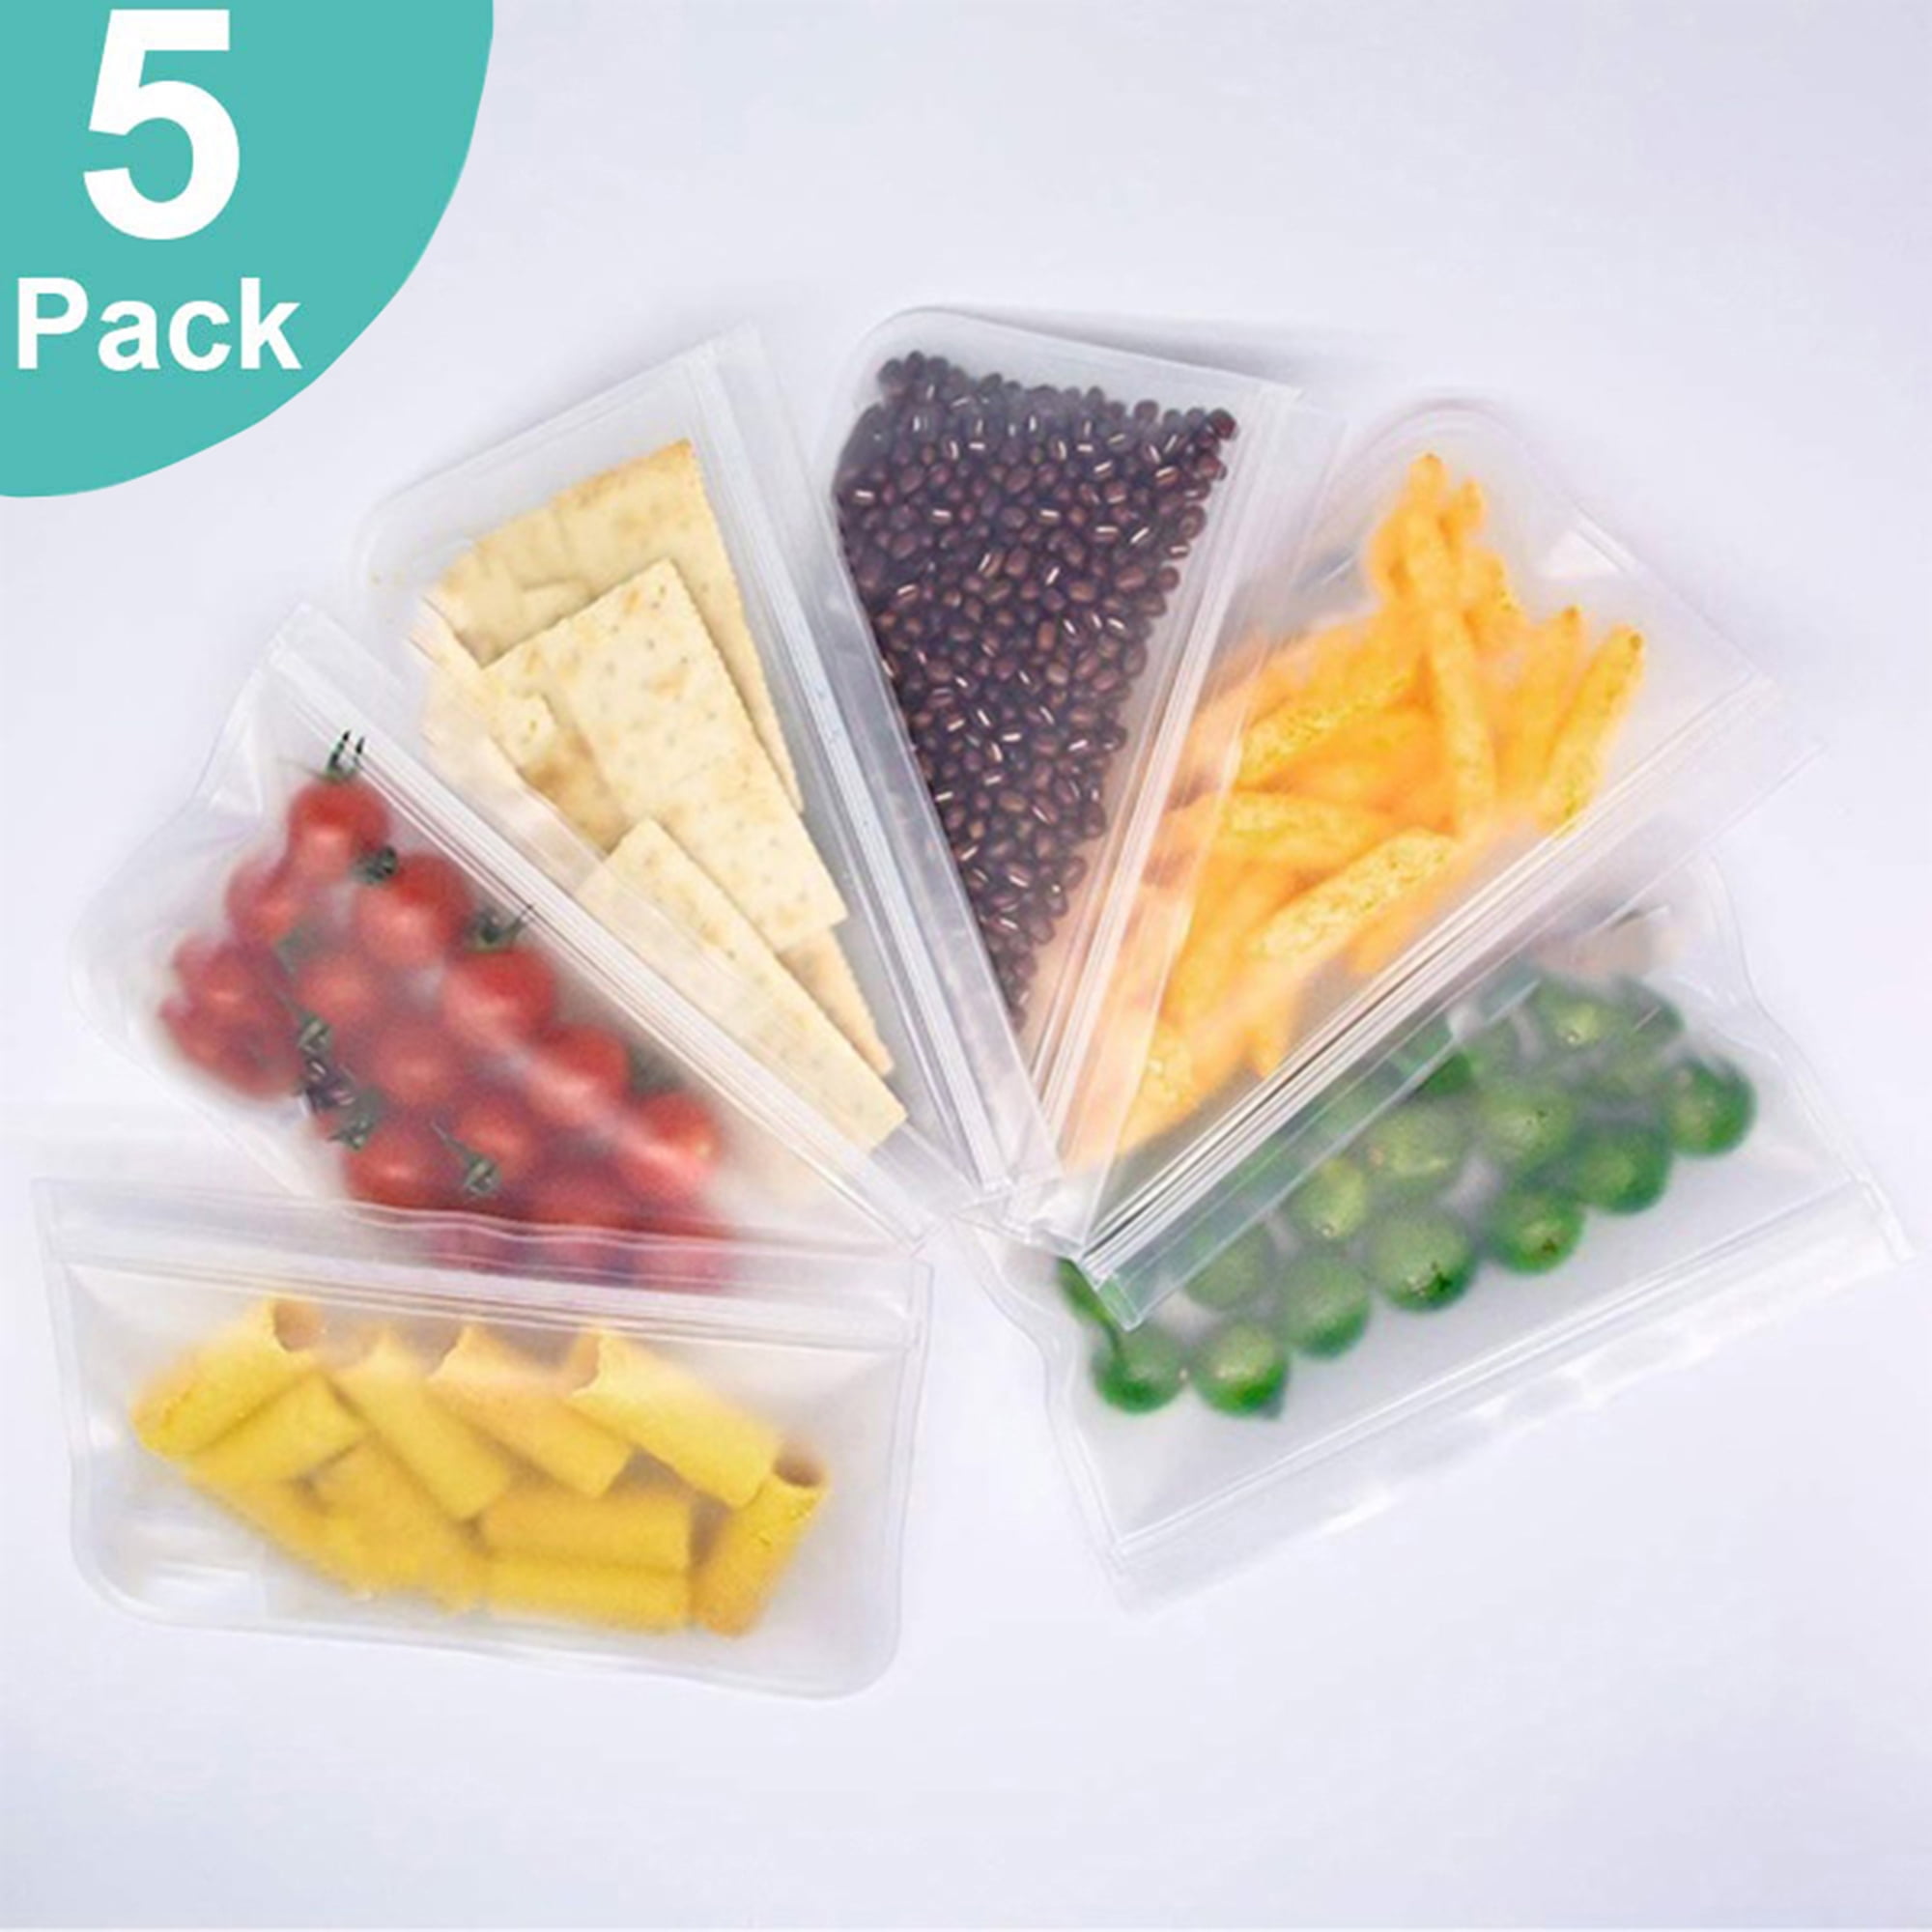 70 RESEALABLE SNACK BAGS LUNCHBOX FOOD POUCH SEALAPACK VALUE PACK 